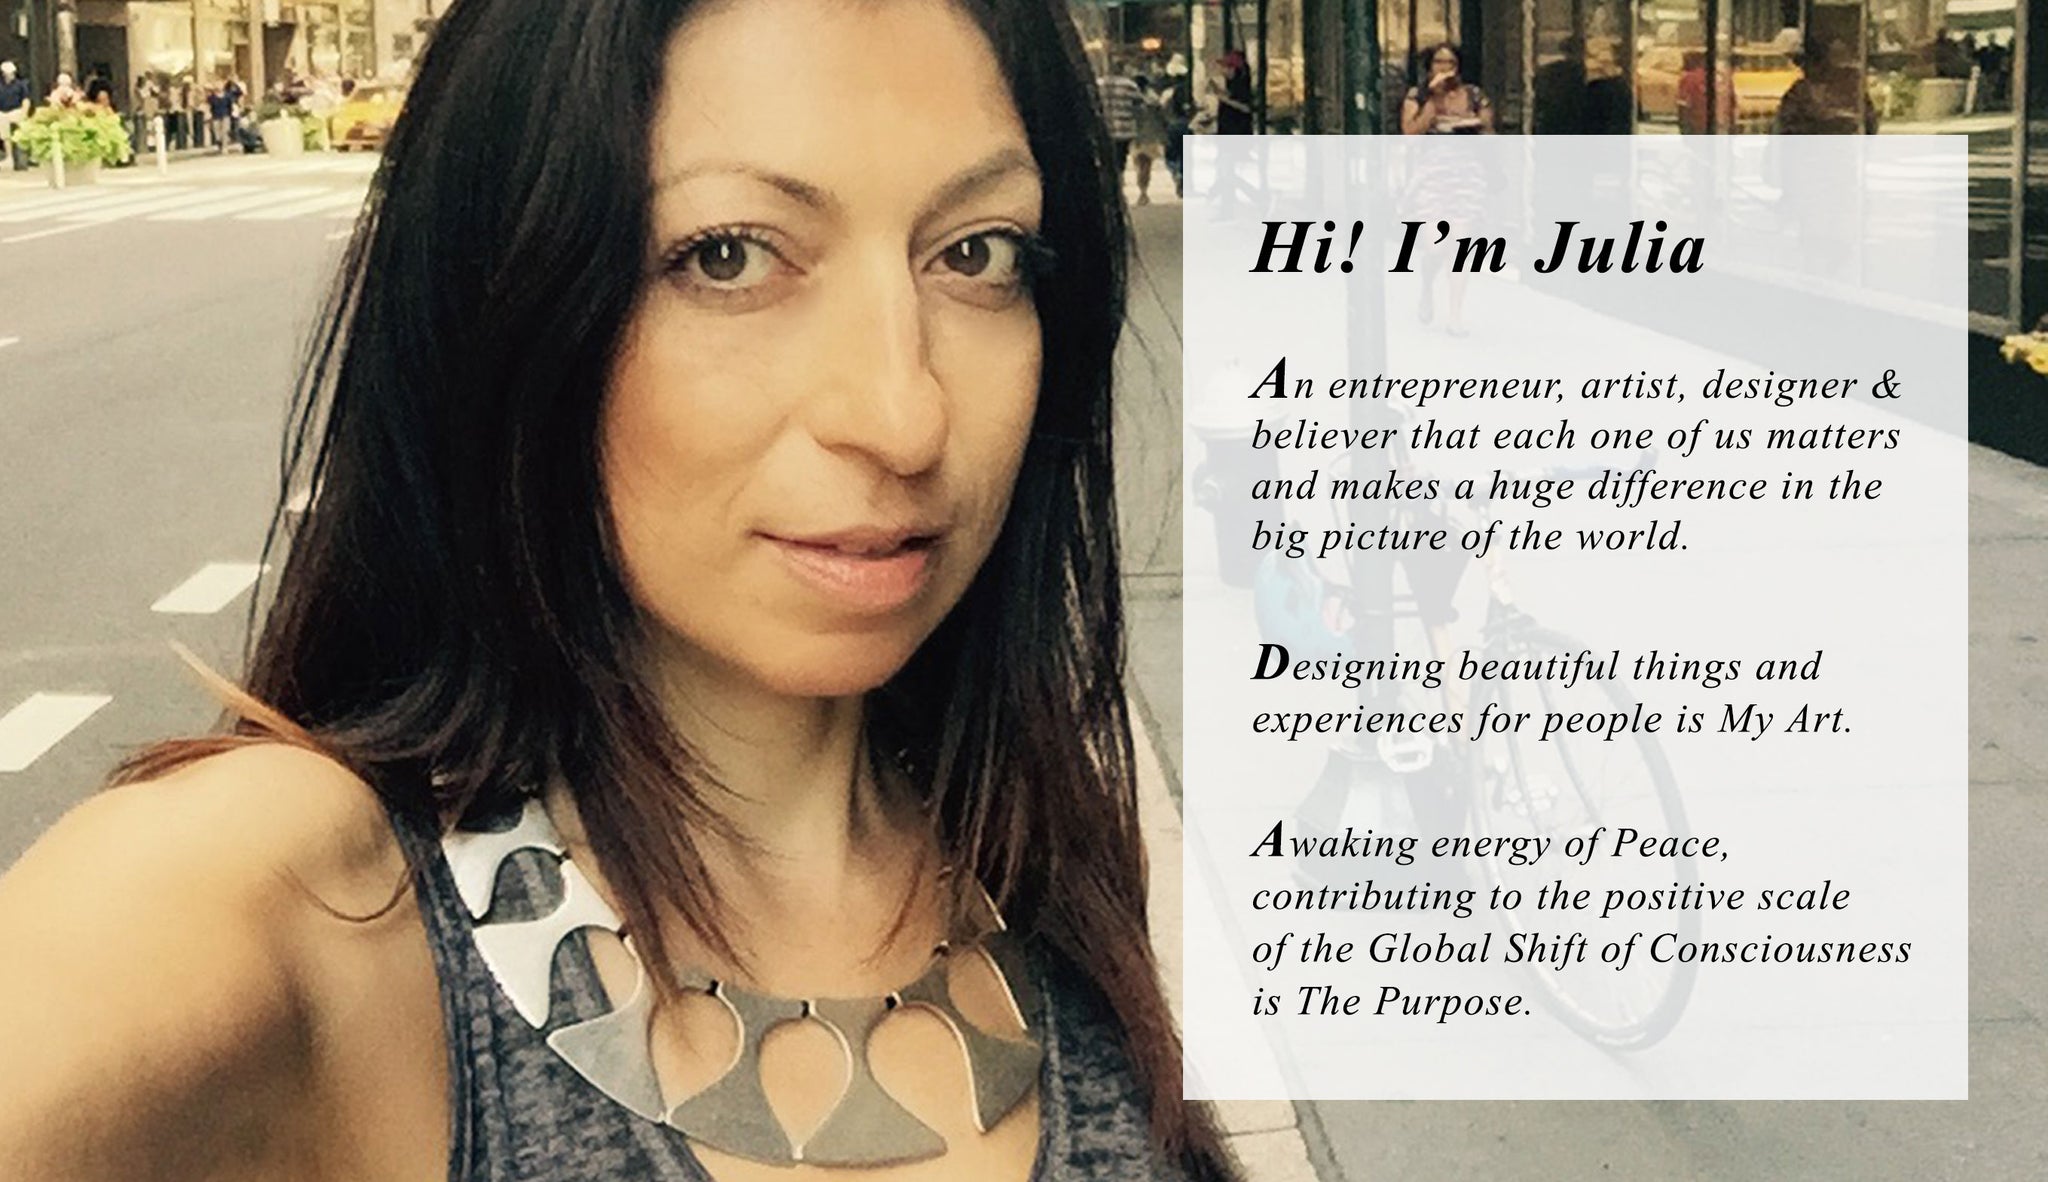 Hi! I’m Julia  Bernadsky, An entrepreneur, artist, designer &  believer that each one of us matters  and makes a huge difference in the  big picture of the world.  Designing beautiful things and  experiences for people is my Art  Awaking energy of Peace, contributing  to the positive scale of the Global Shift of  Consciousness is the purpose.